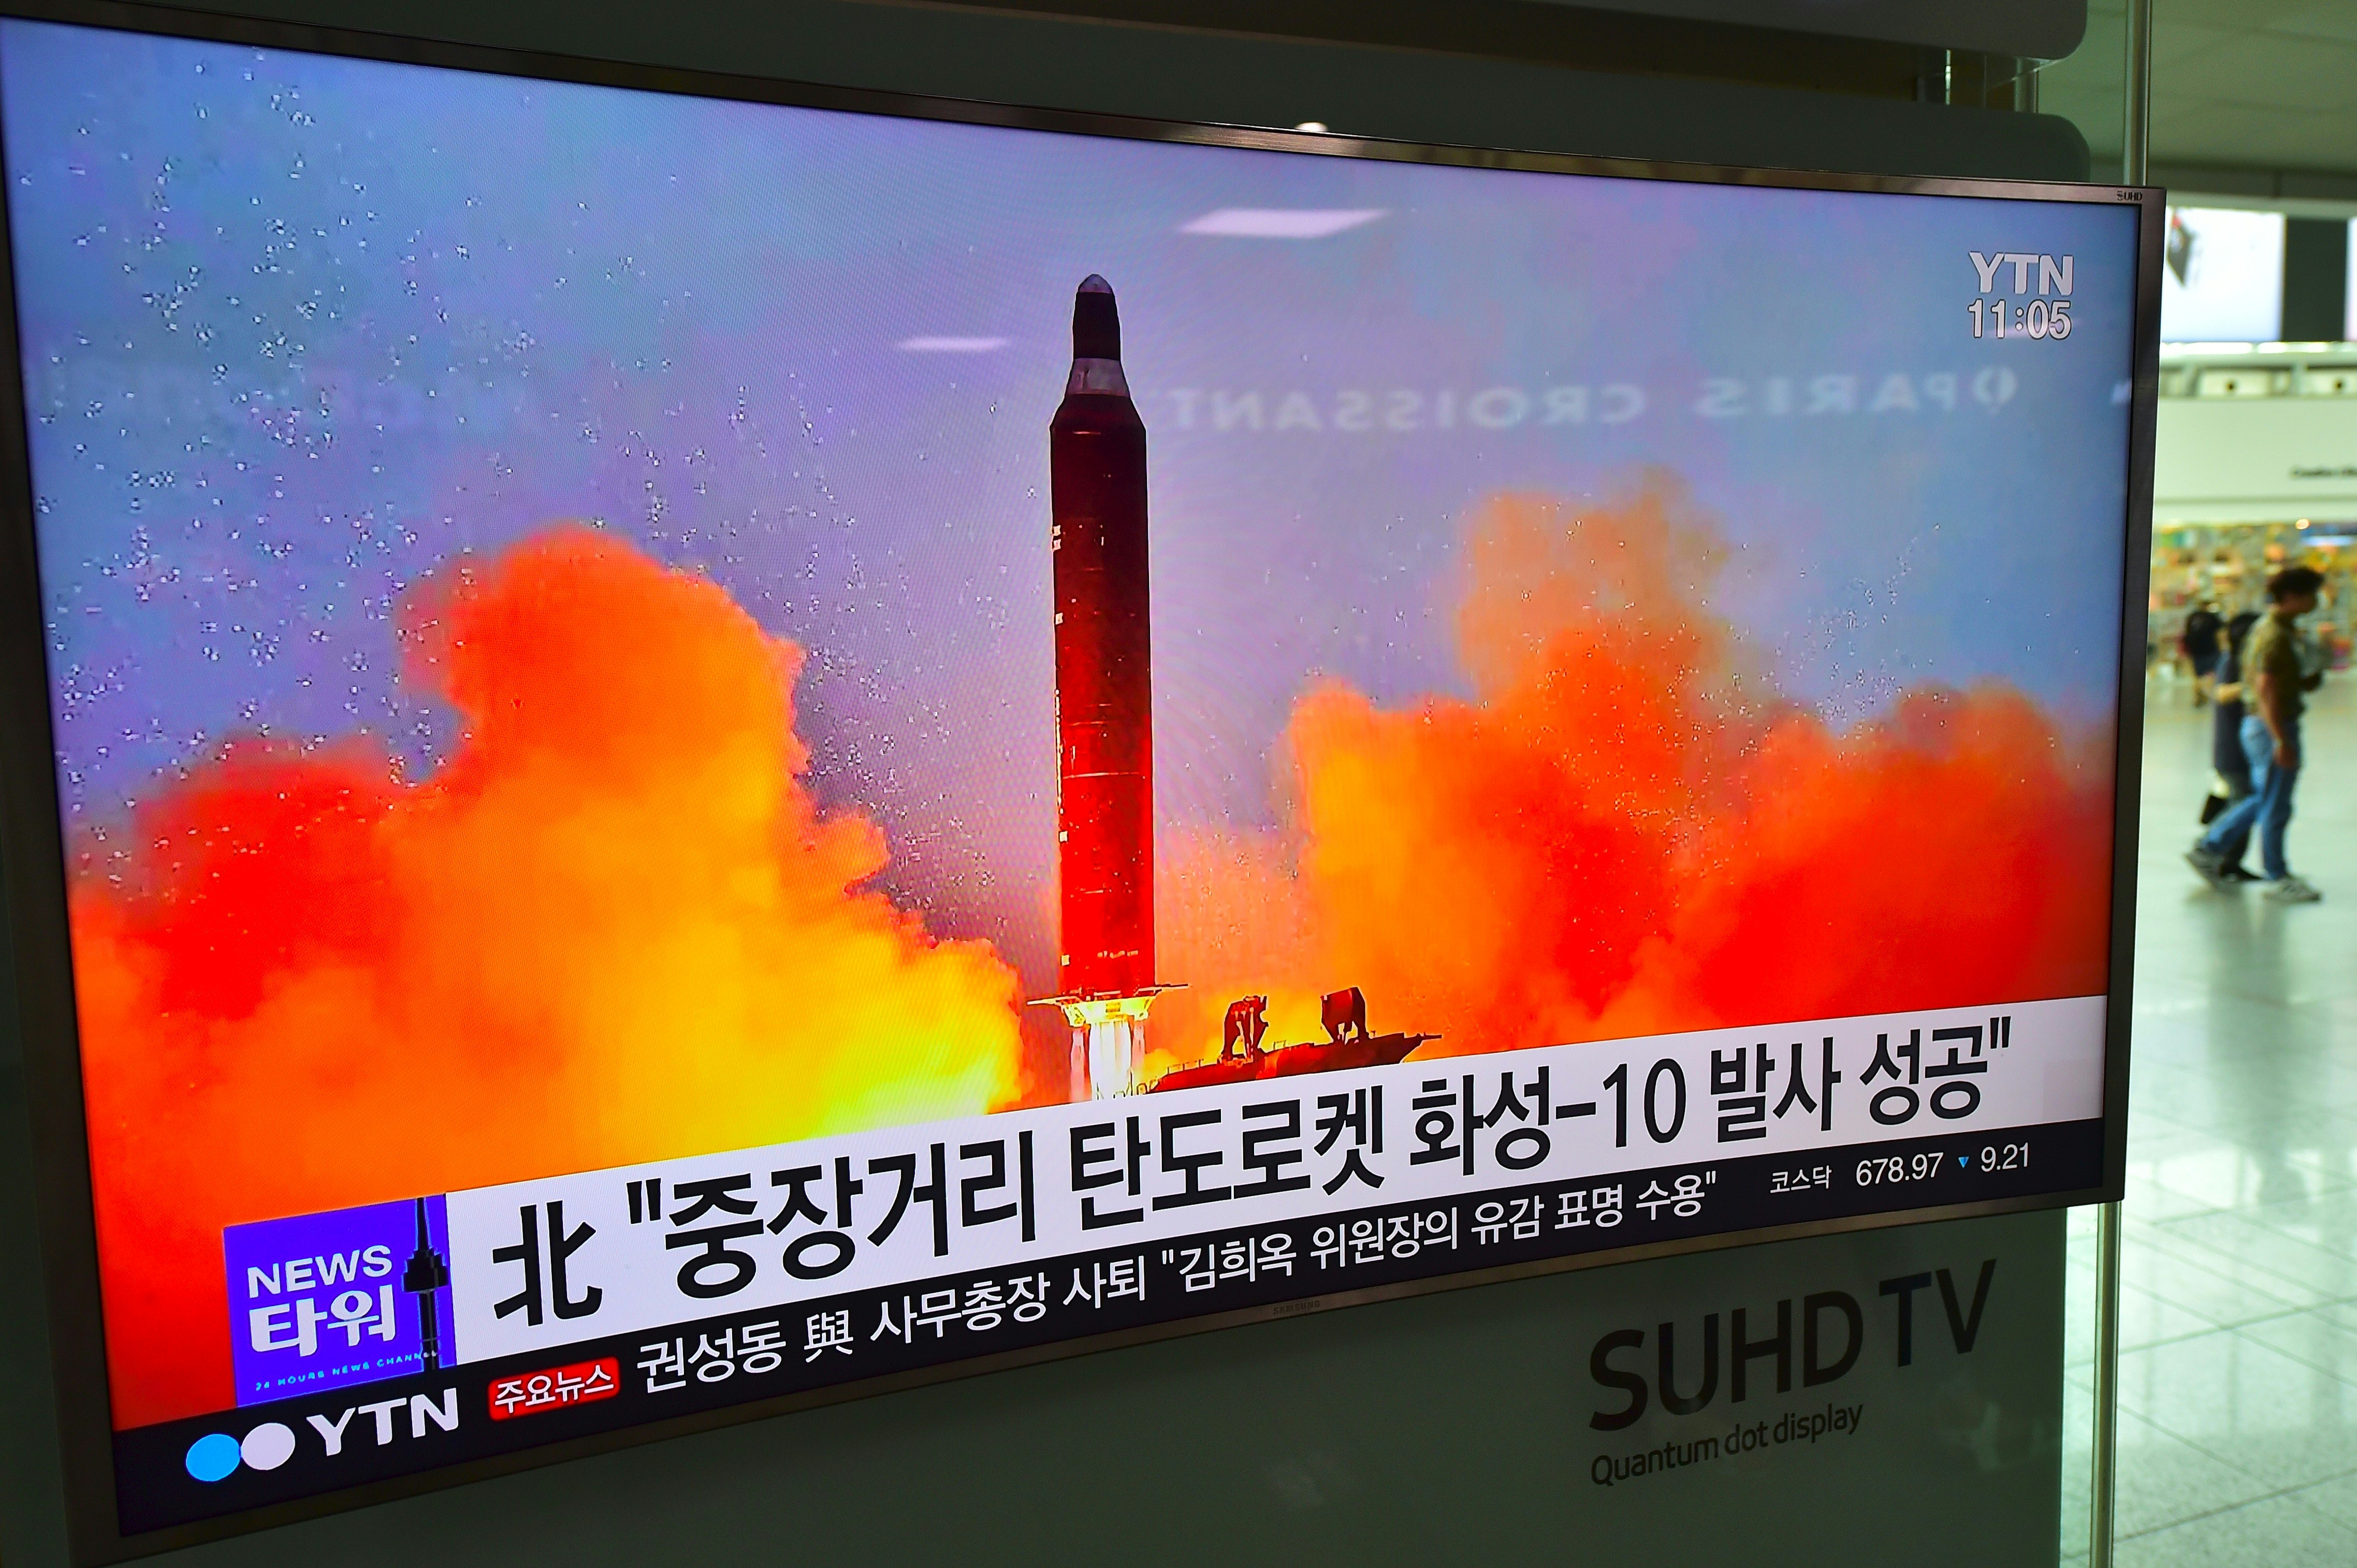 People walk past a television screen reporting news of North Korea's latest Musudan missile test, at a railway station in Seoul on June 23, 2016. North Korean leader Kim Jong-Un has hailed the successful test of a powerful new medium-range missile, saying it poses a direct threat to US military bases in the Pacific, state media reported on June 23. / AFP PHOTO / JUNG YEON-JE